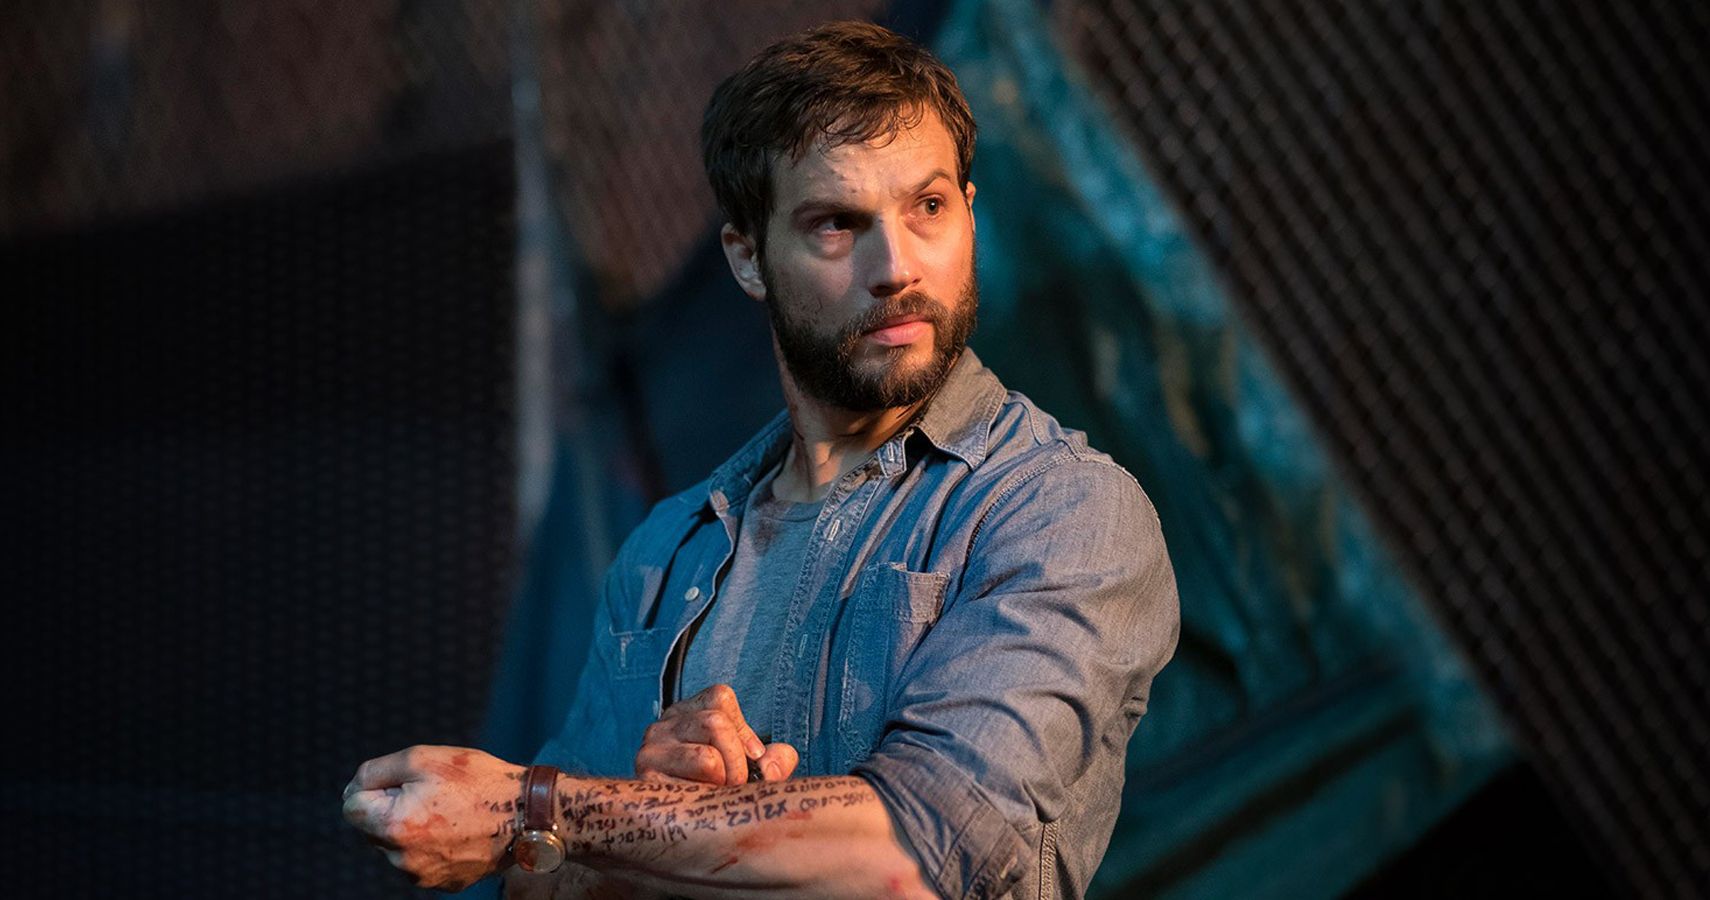 Director. featured a starring role for Logan Marshall-Green as Grey Trace